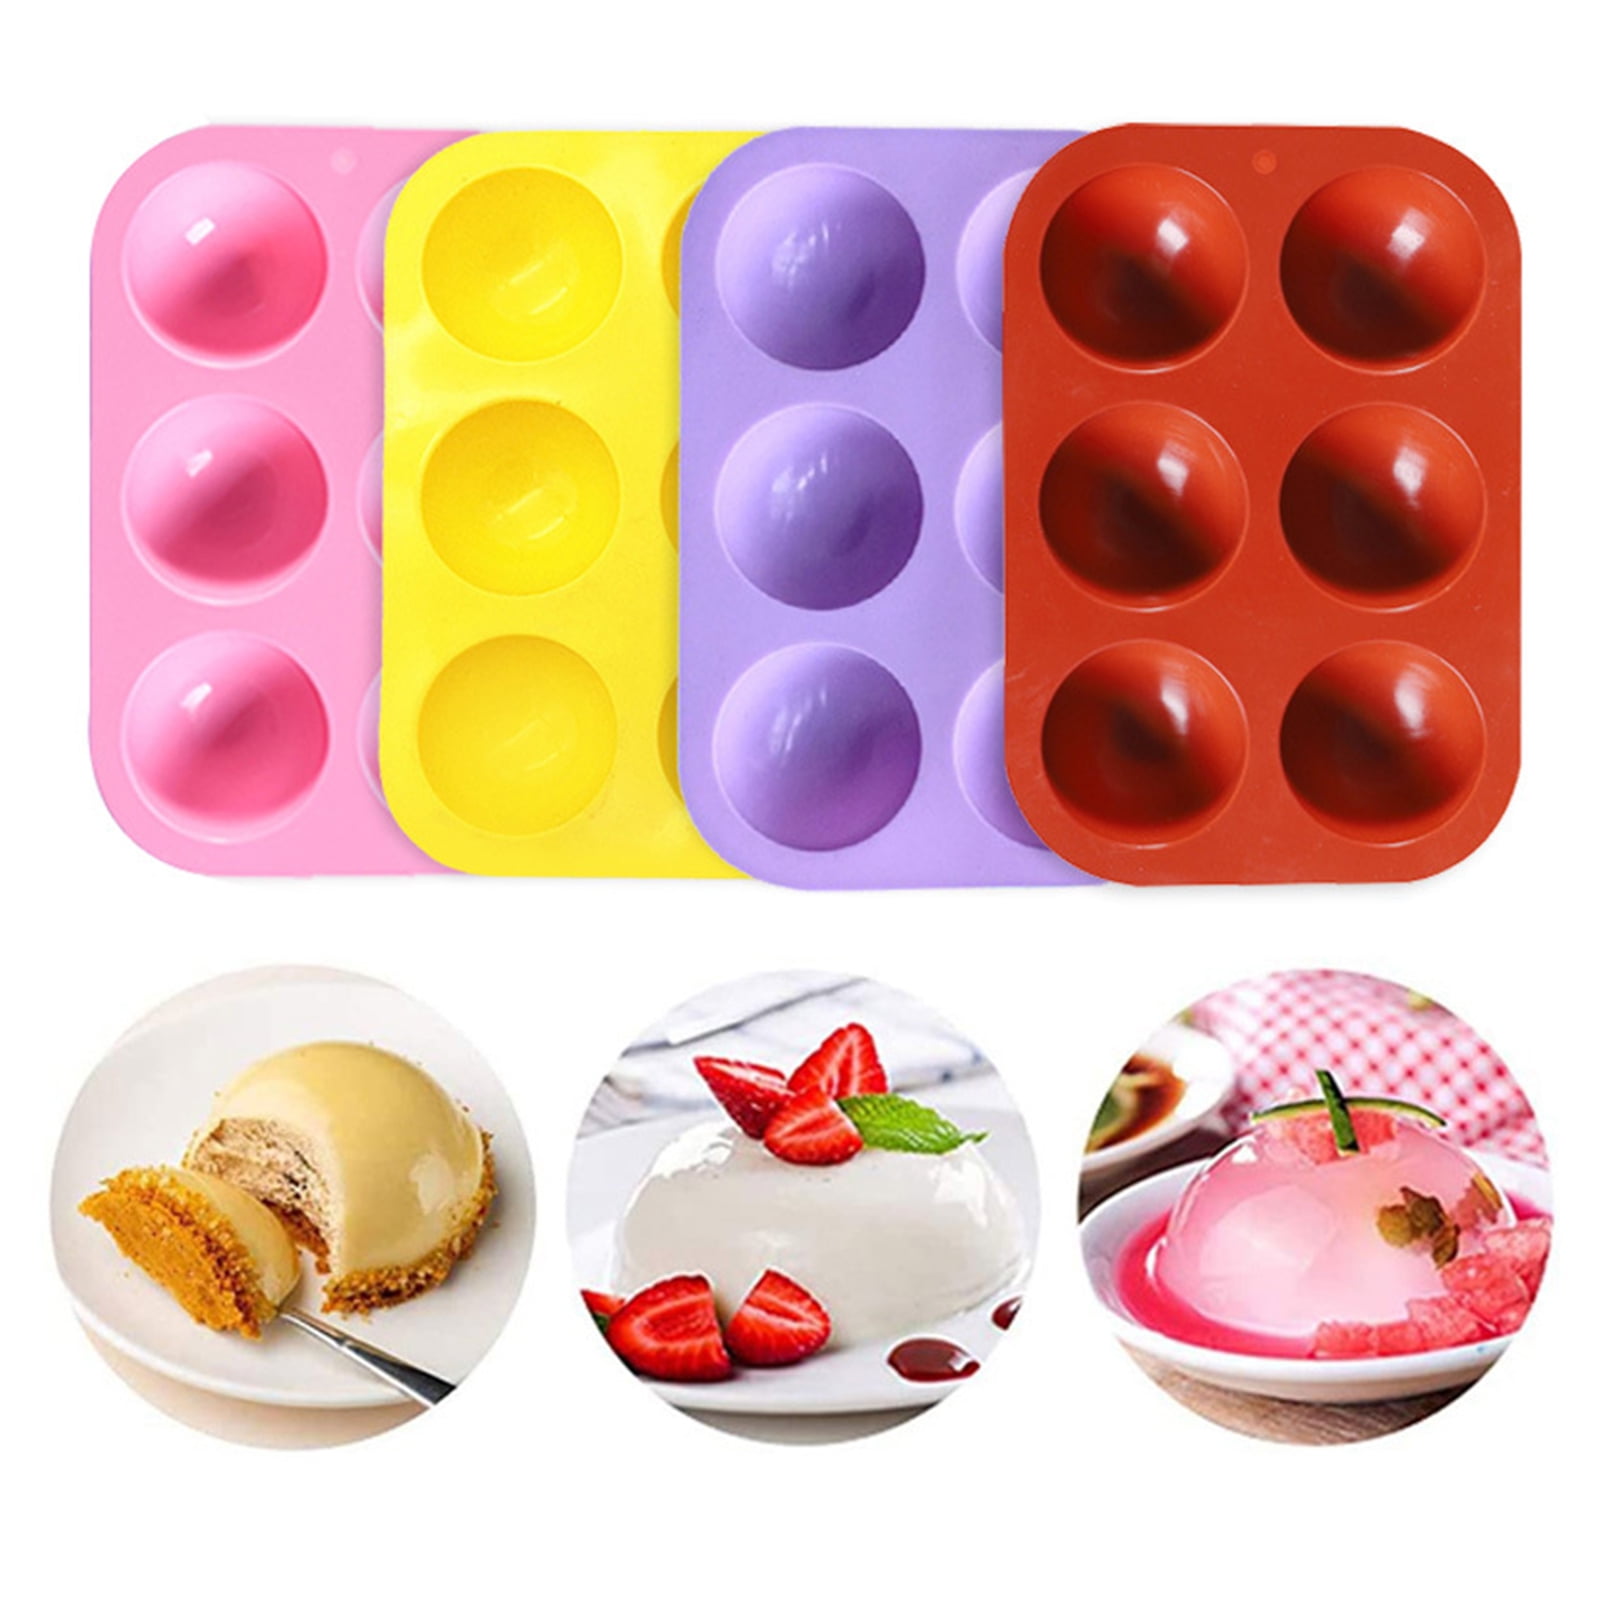 1pcs 4 inch 6 inch Silicone mold round chocolate cake mold baking mold 